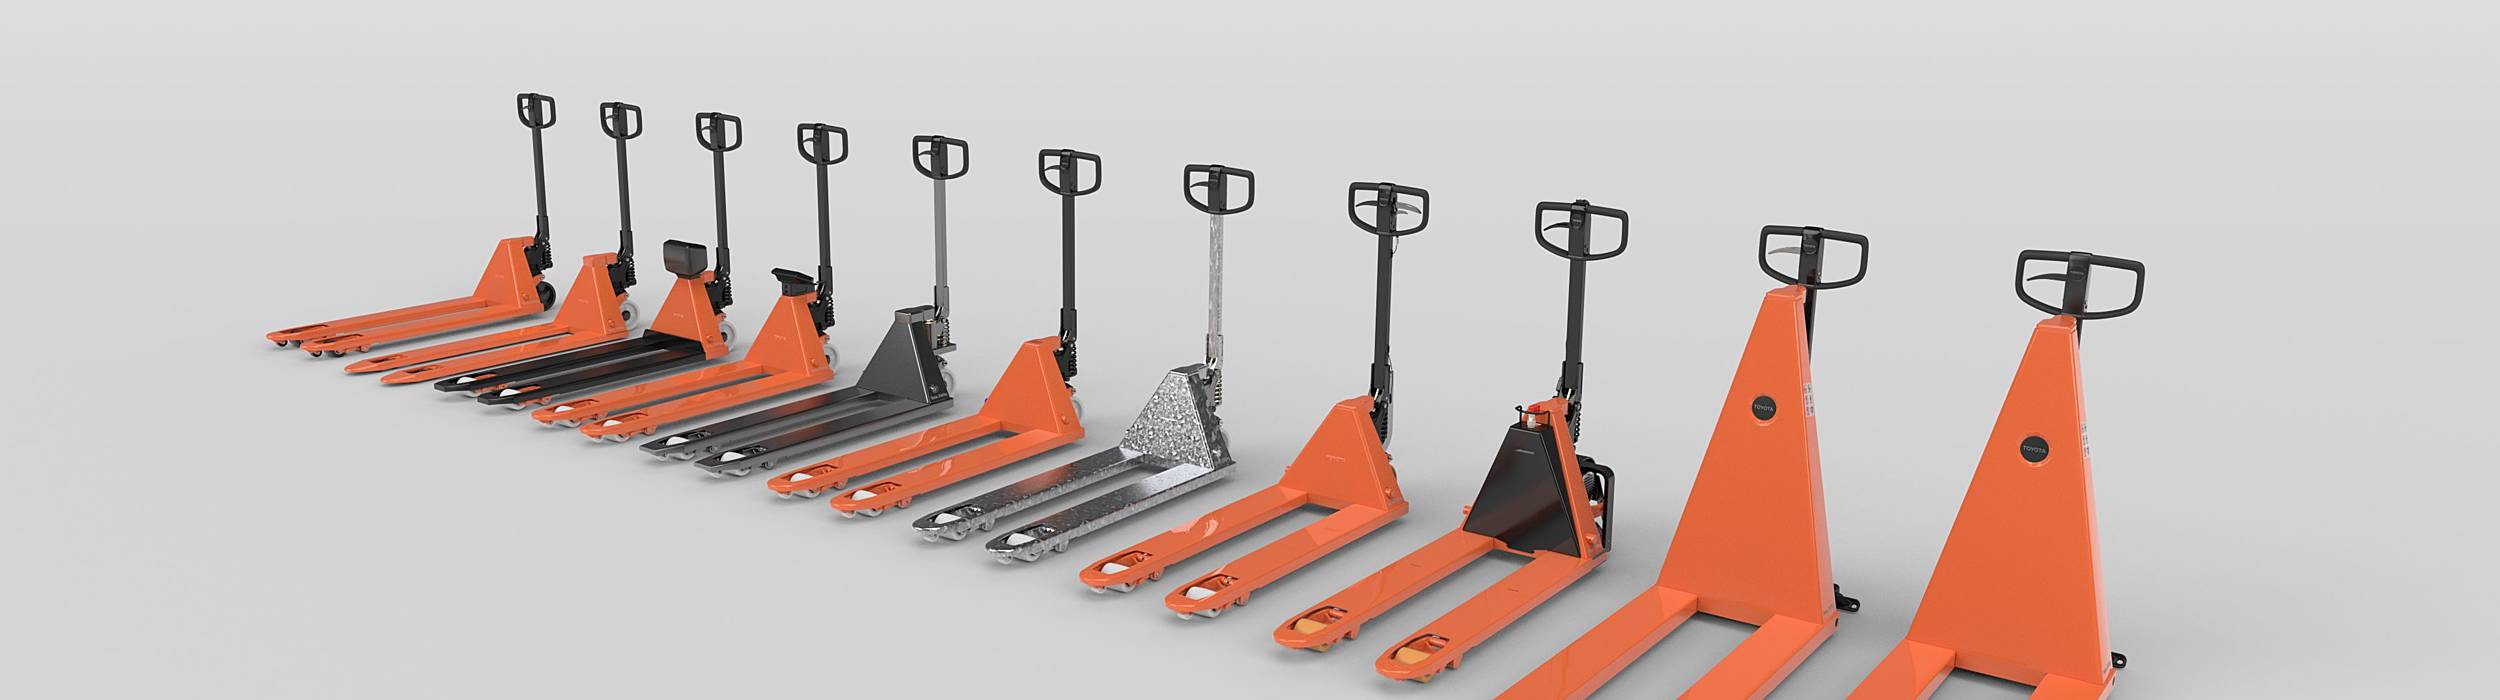 Pallet Truck Plus from Toyota gives you a hassle-free way of managing your fleet of hand pallet trucks.